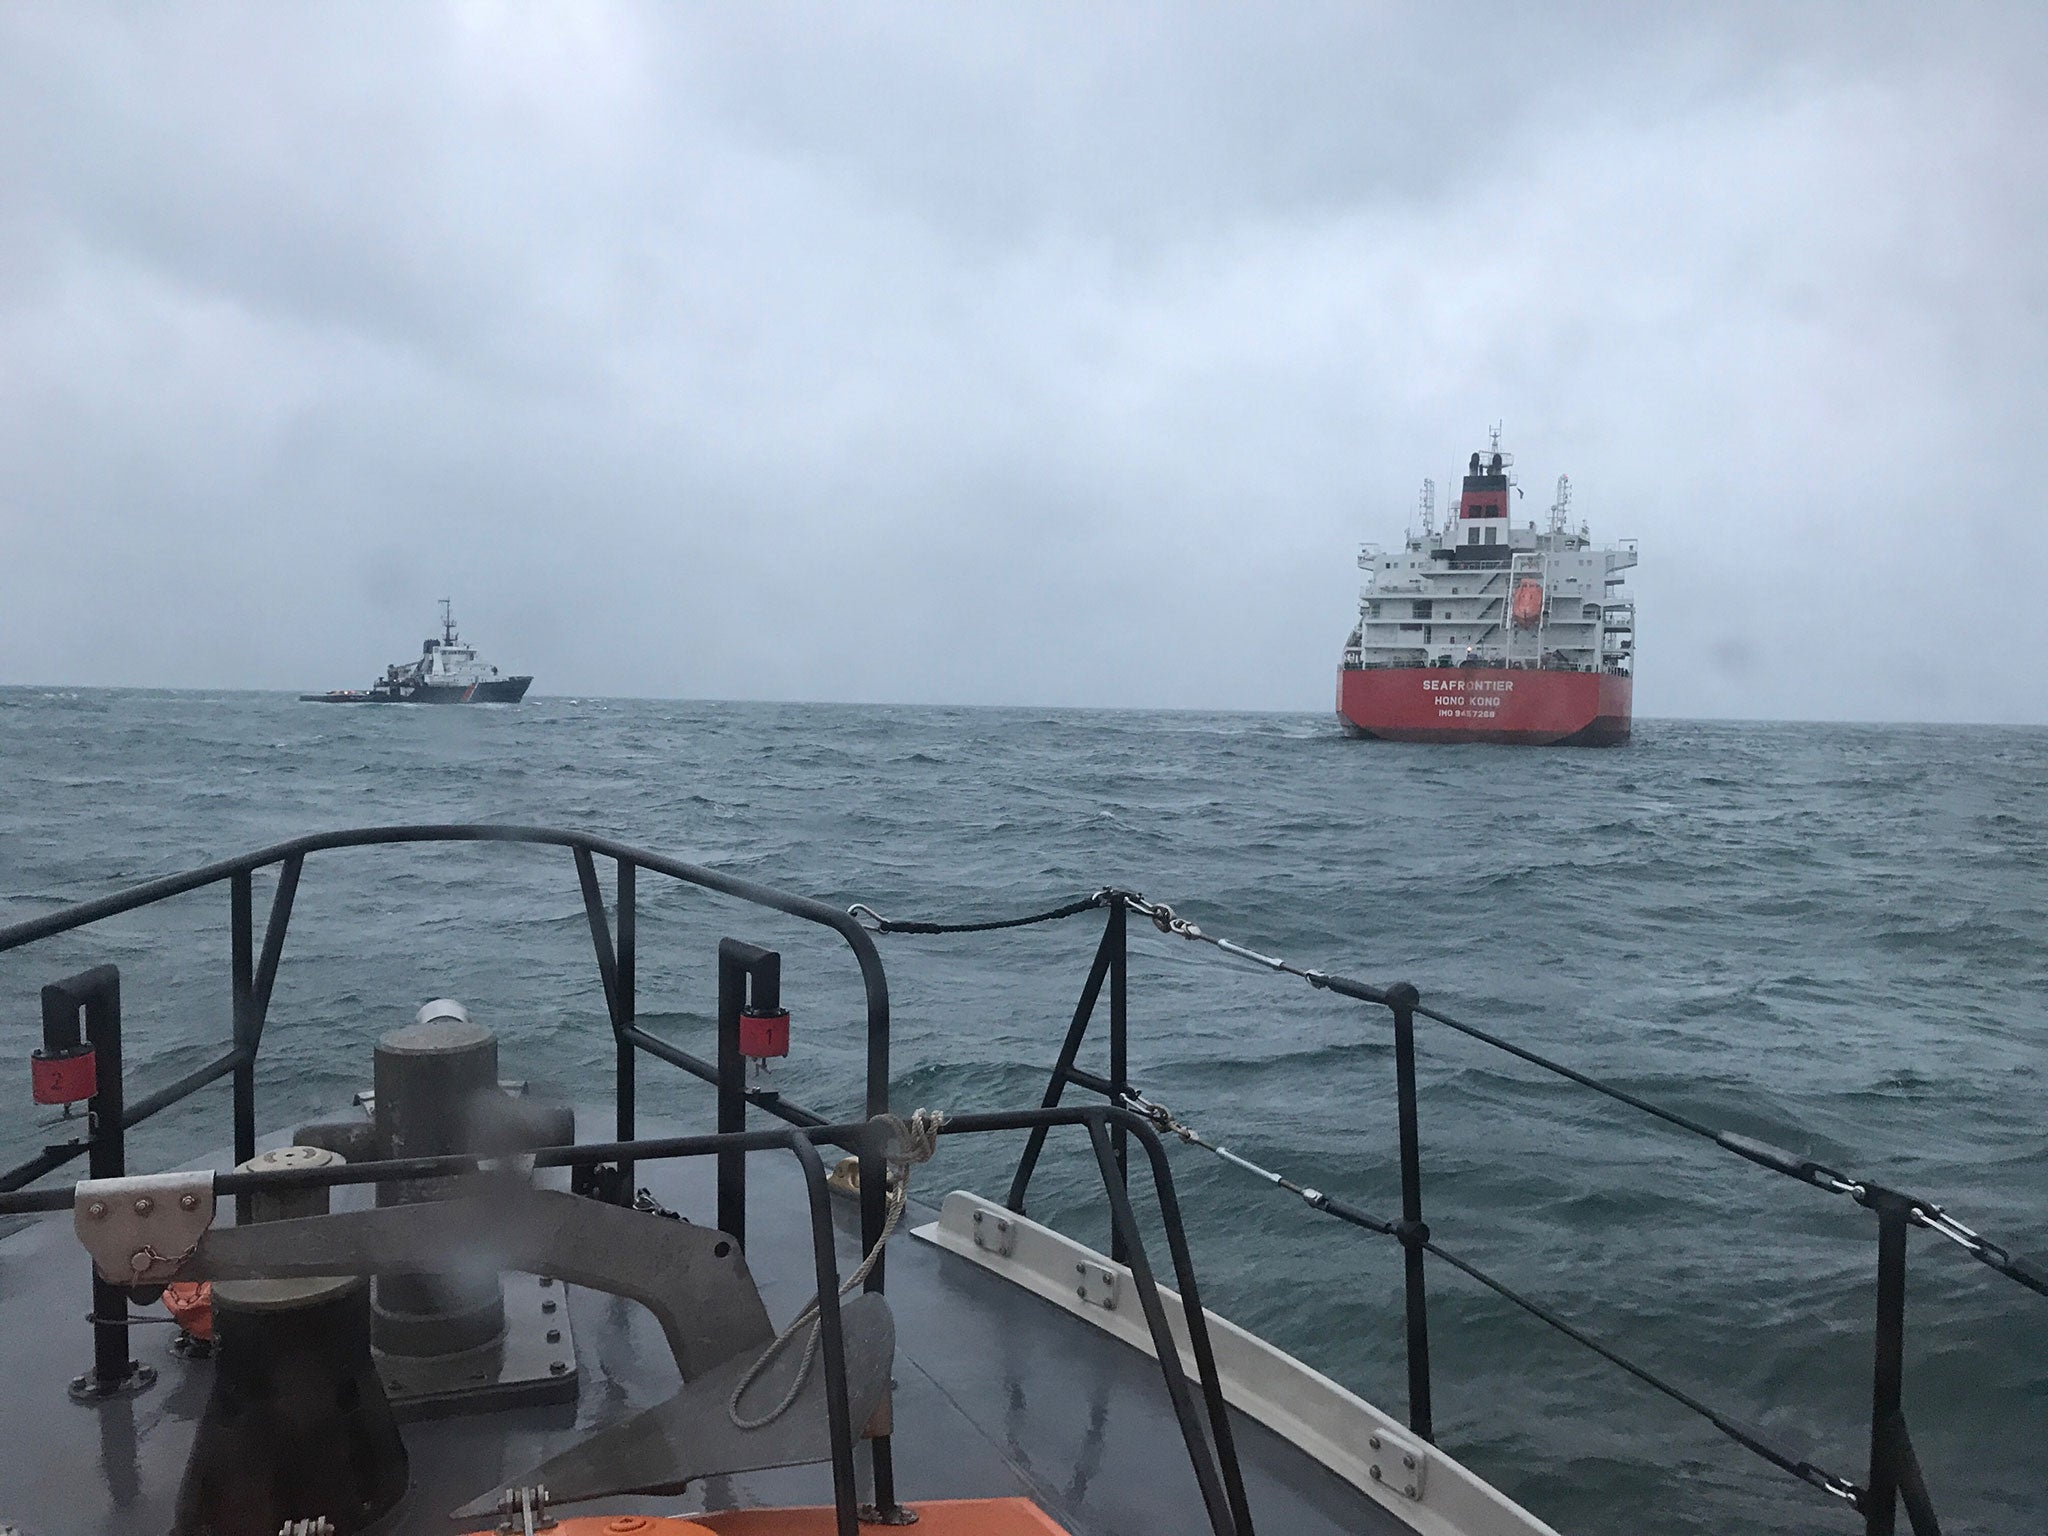 FILE: It is the second collision incident in the Channel in a month, after a Seafrontier oil tanker was involved in an incident off Ramsgate